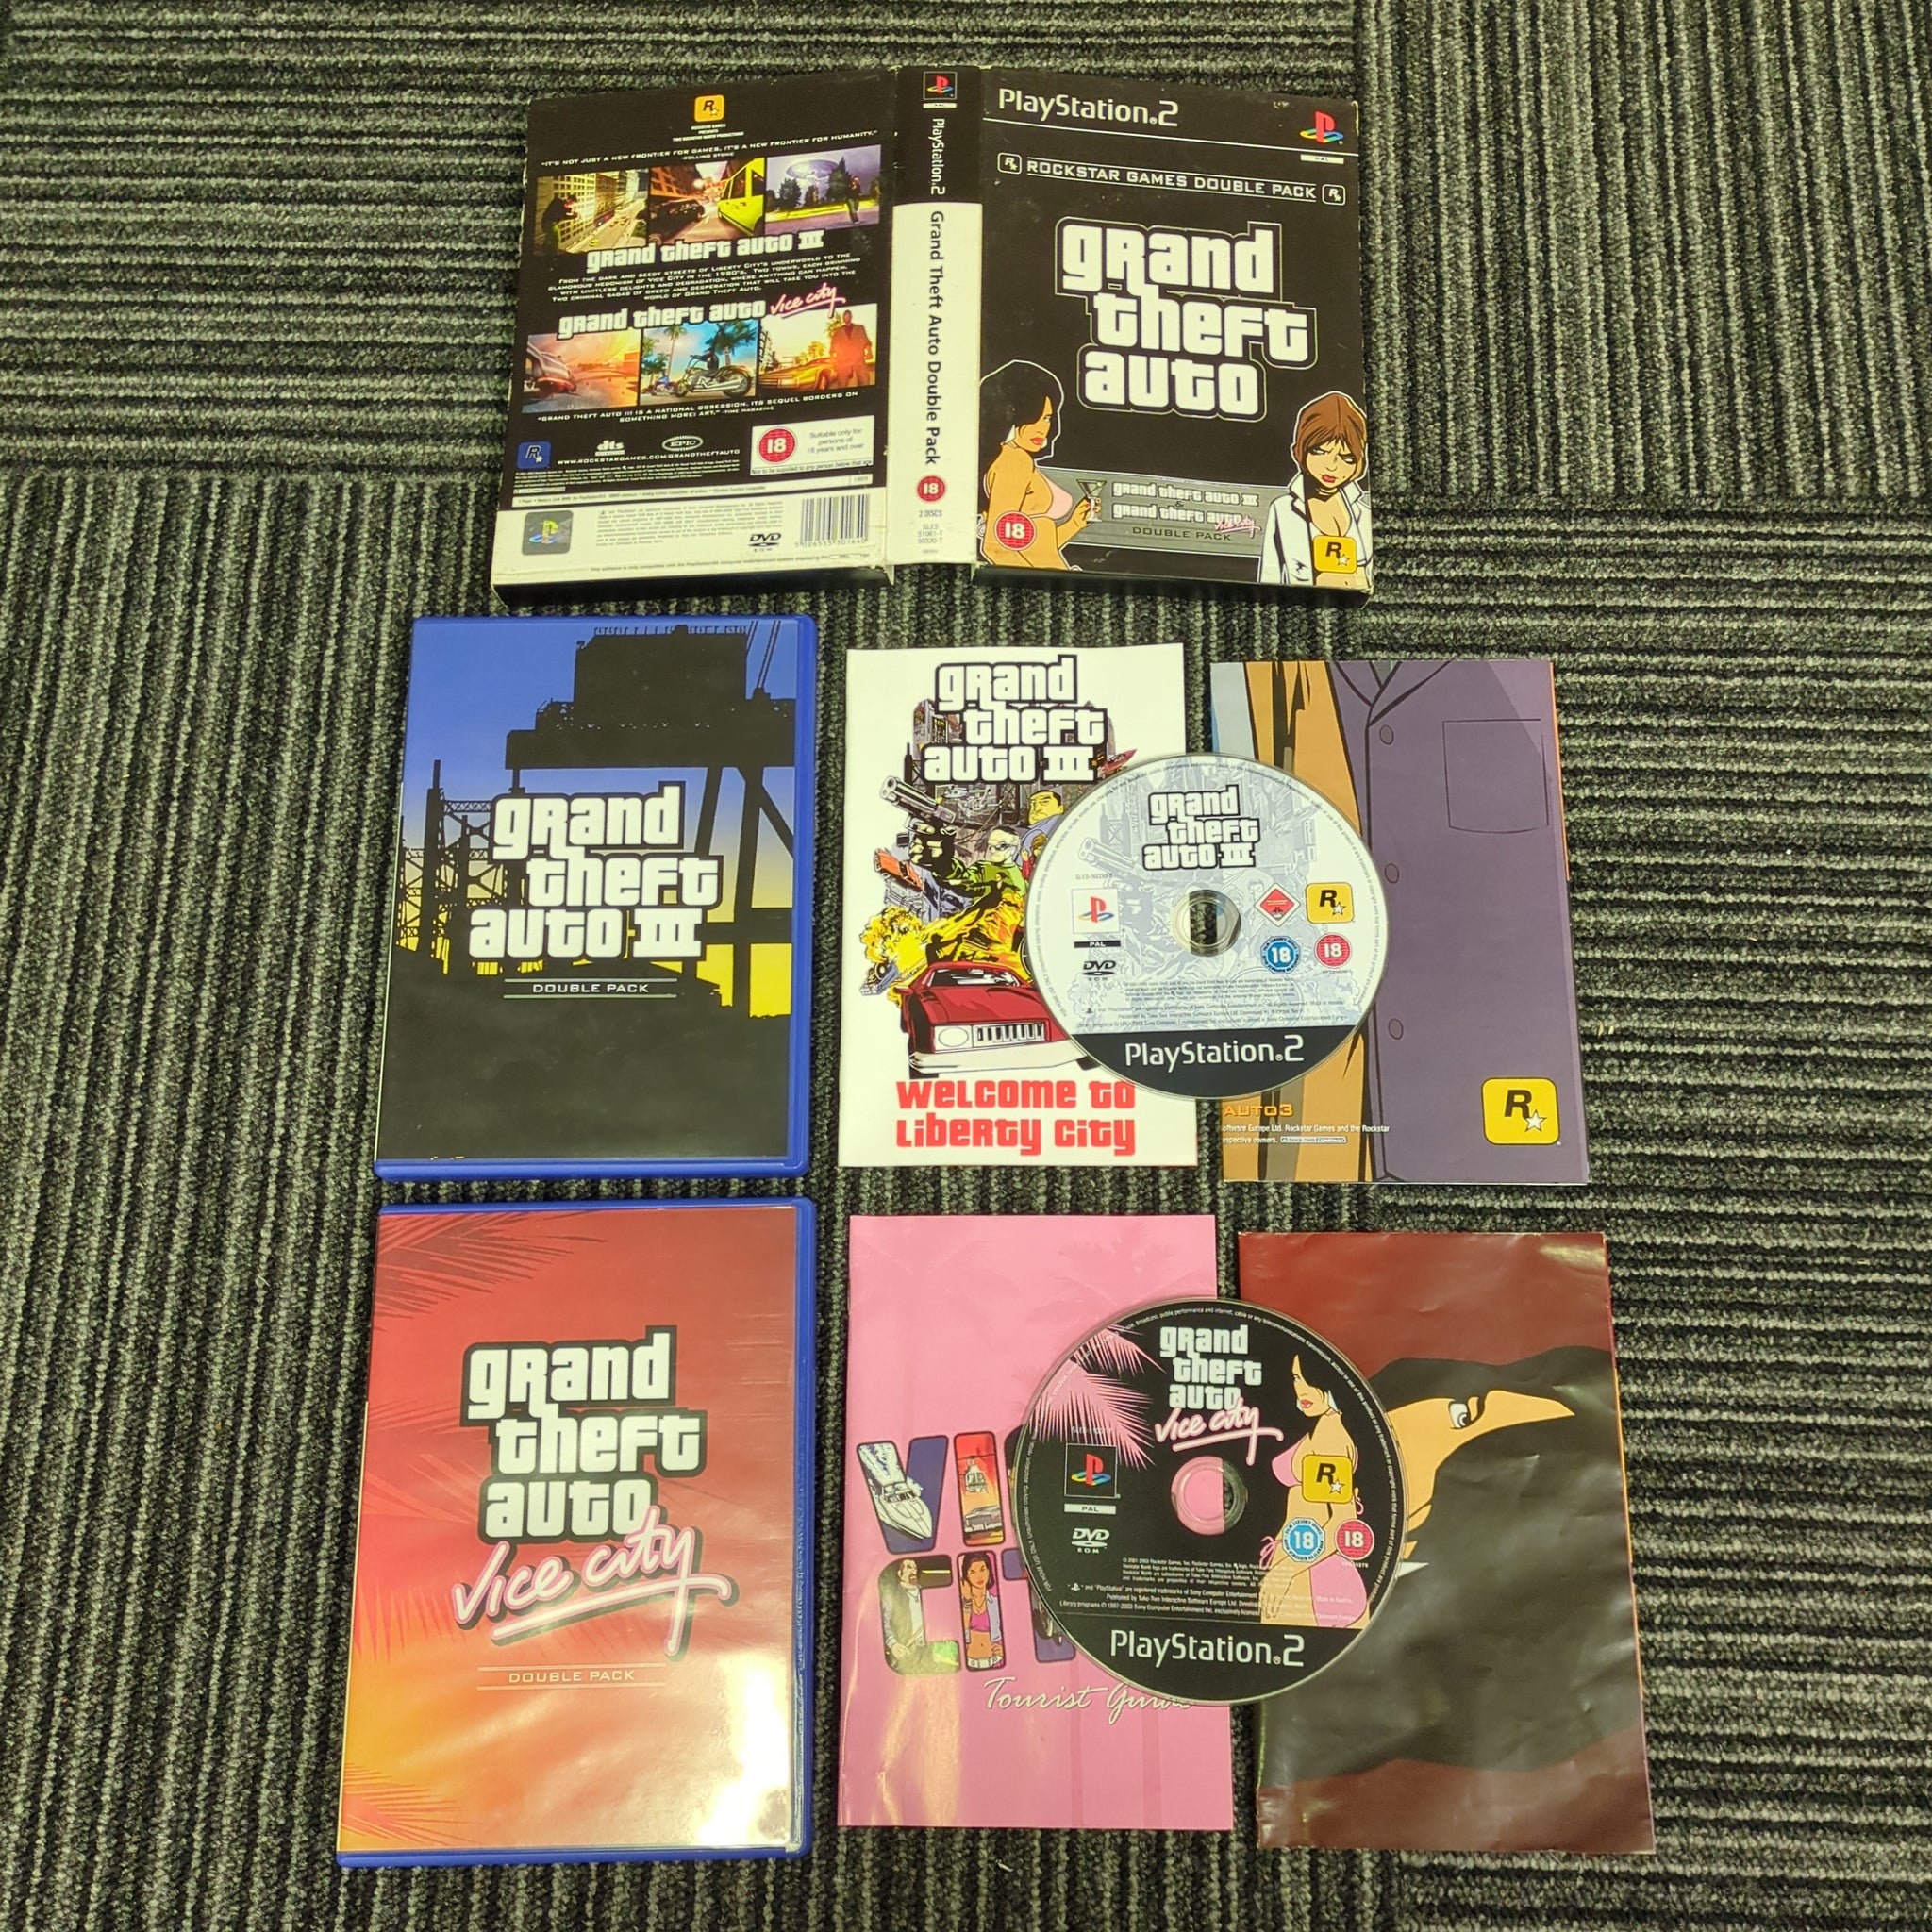 Grand theft auto games codebooks & ultimate codes Max pack for Playstation 2-3